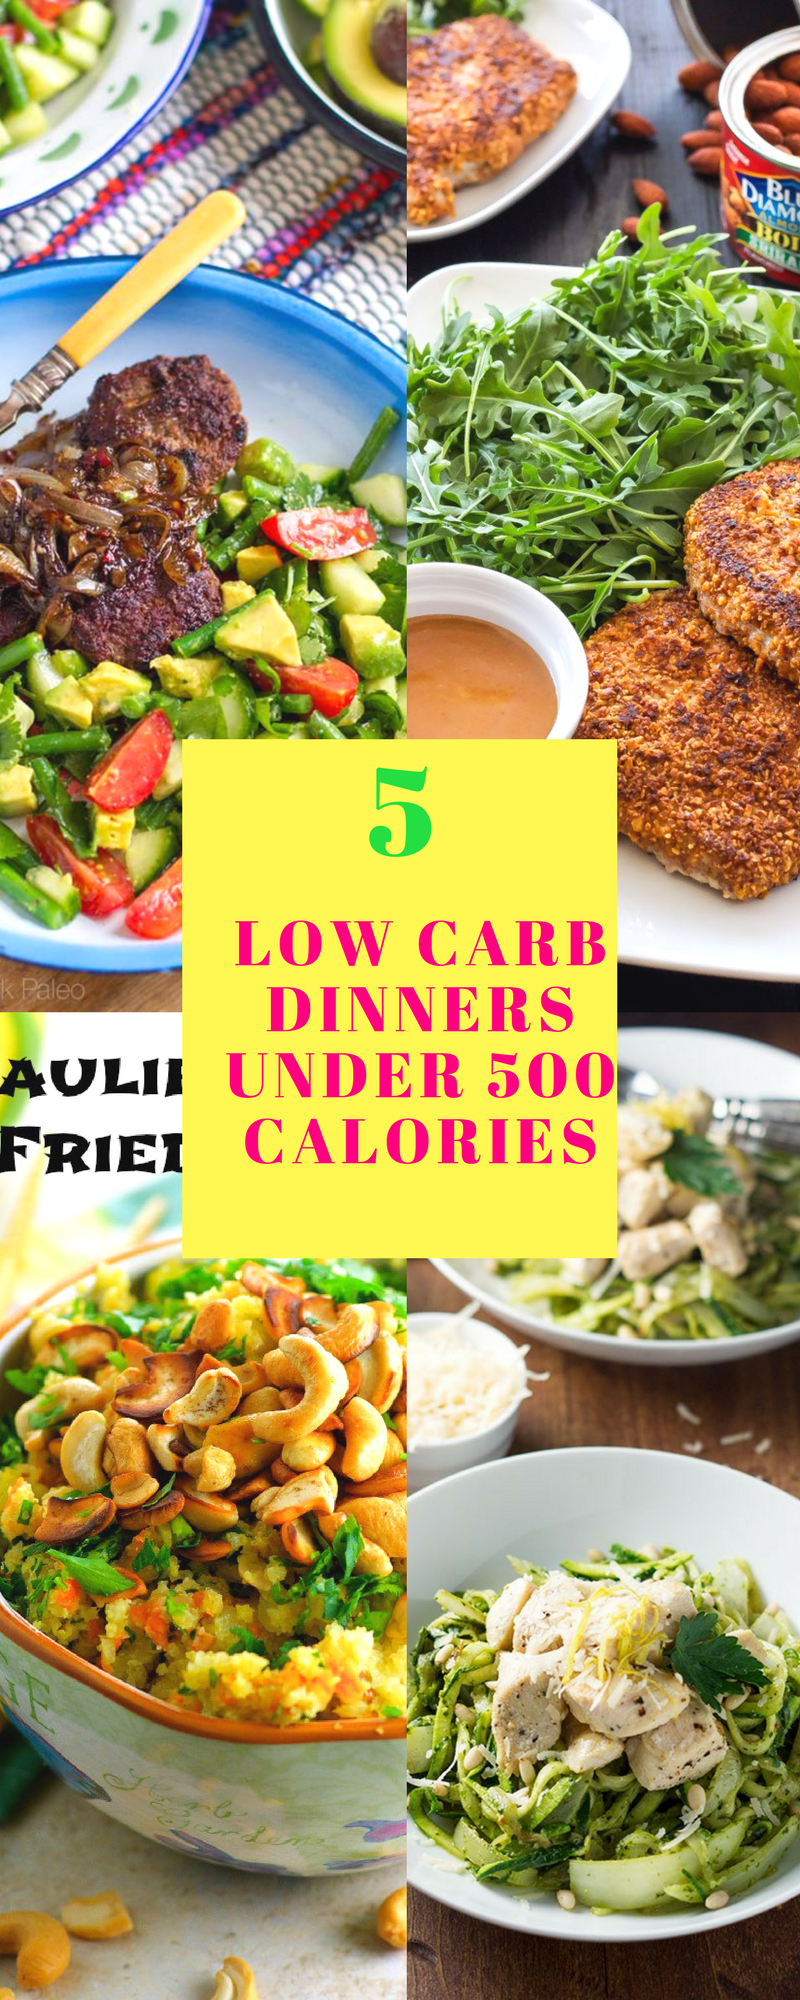 Slay your weight loss goals with these 5 dinners that are low carb, healthy and under 500 calories. Following a Keto or Paleo diet, these meals are the perfect solution.